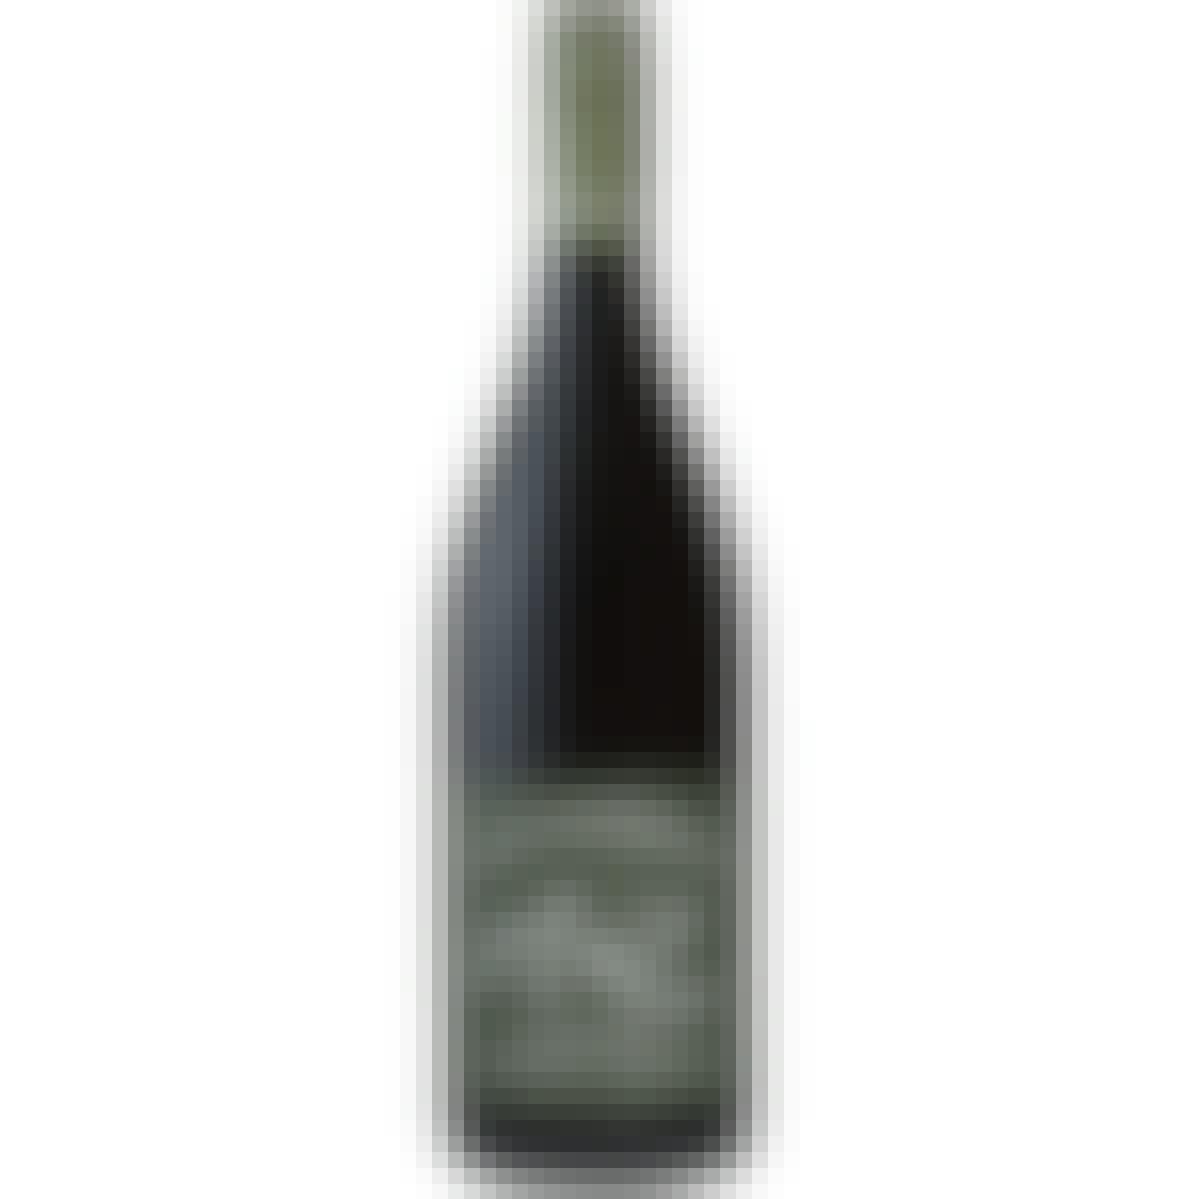 A to Z Wineworks The Essence Of Oregon Pinot Noir 2016 750ml